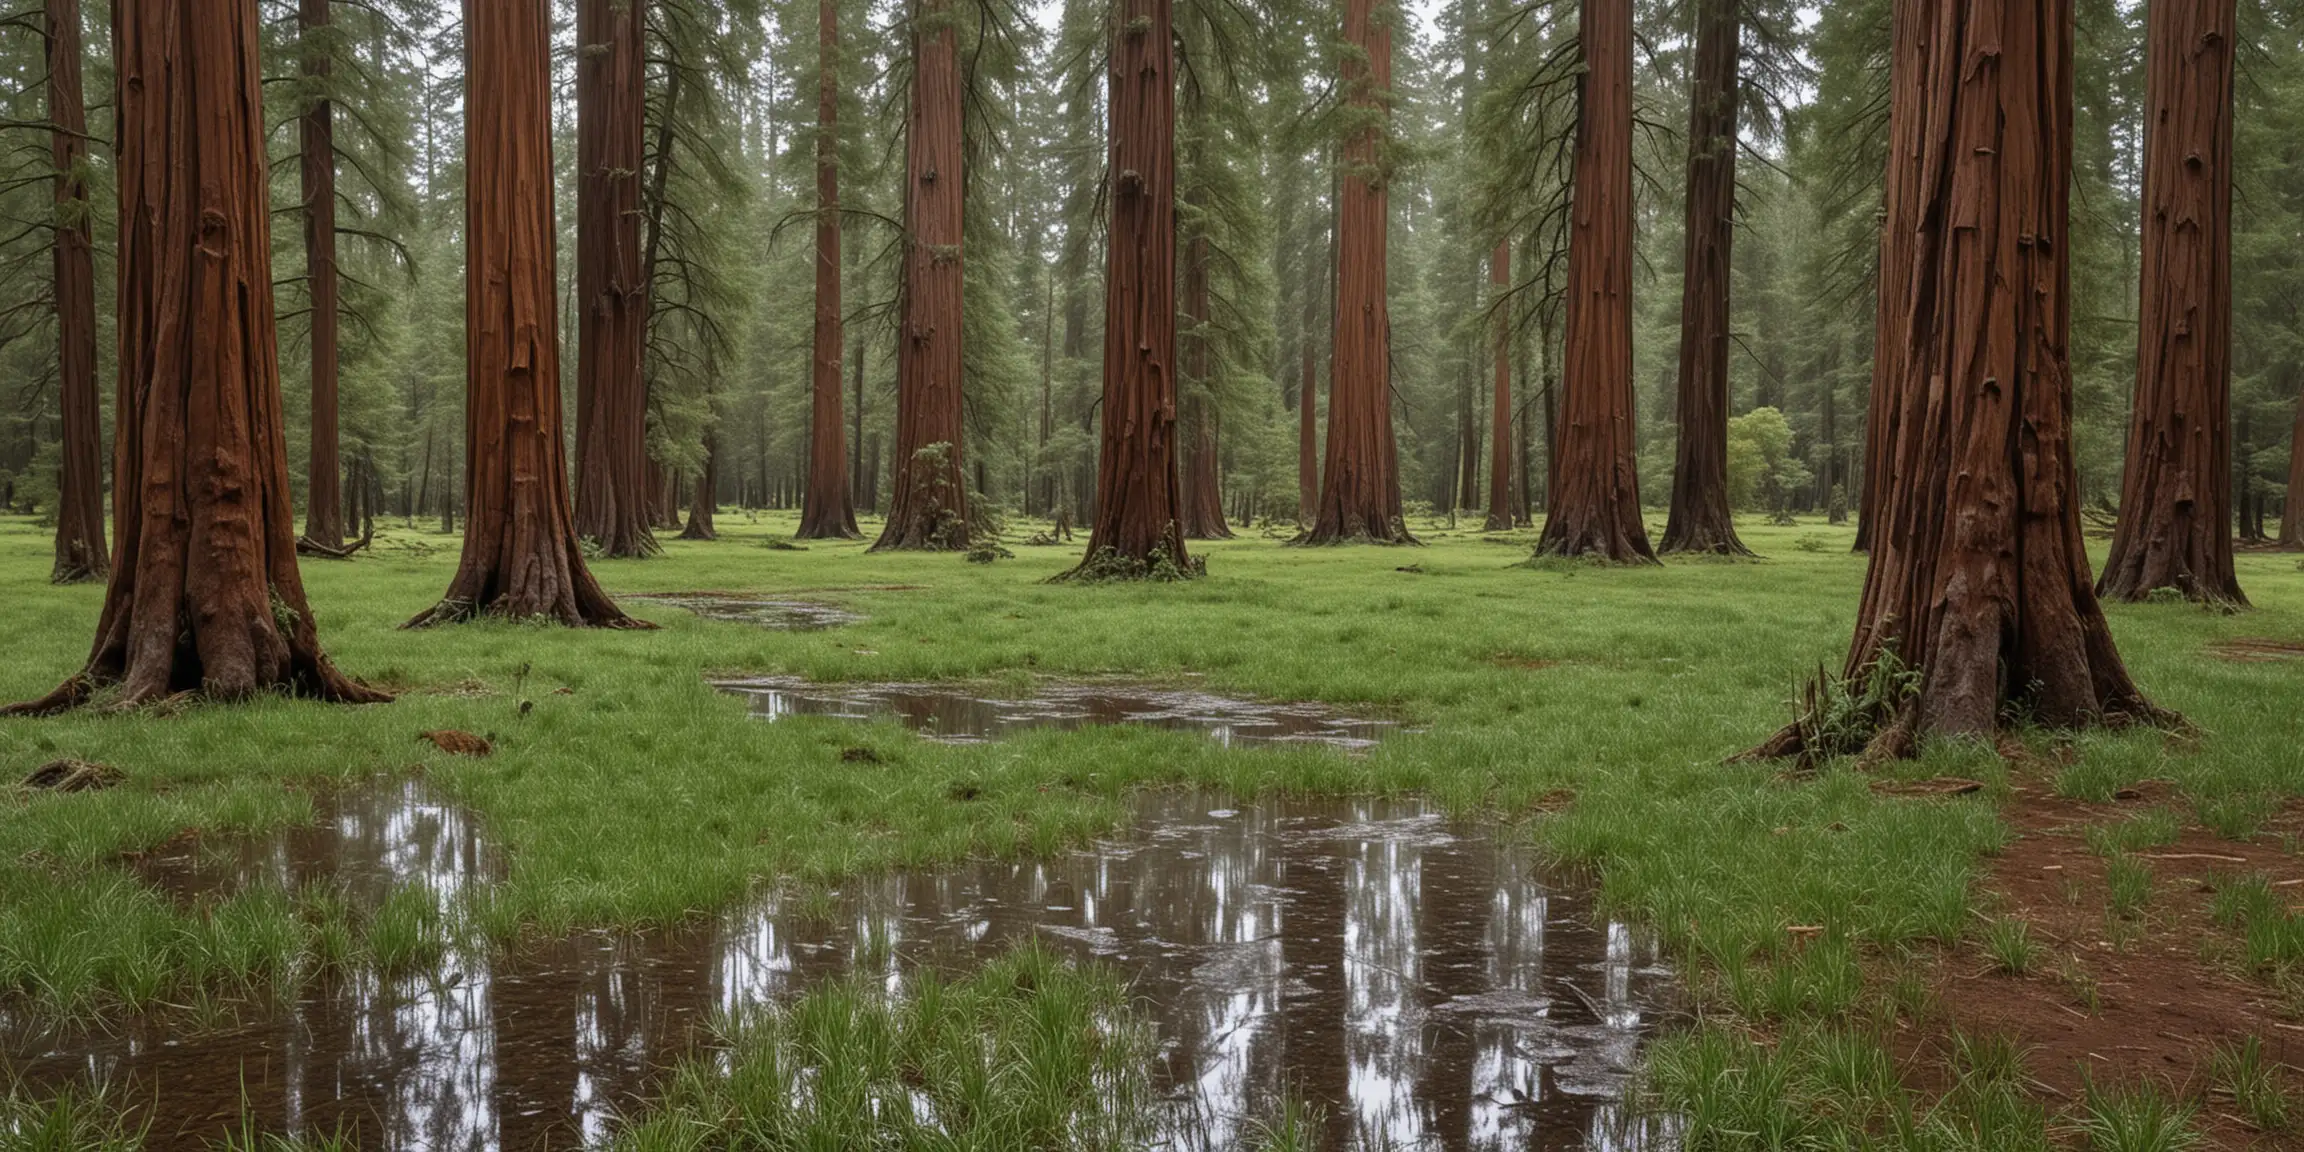 Tranquil Redwood Trees and Puddles in Grassy Field